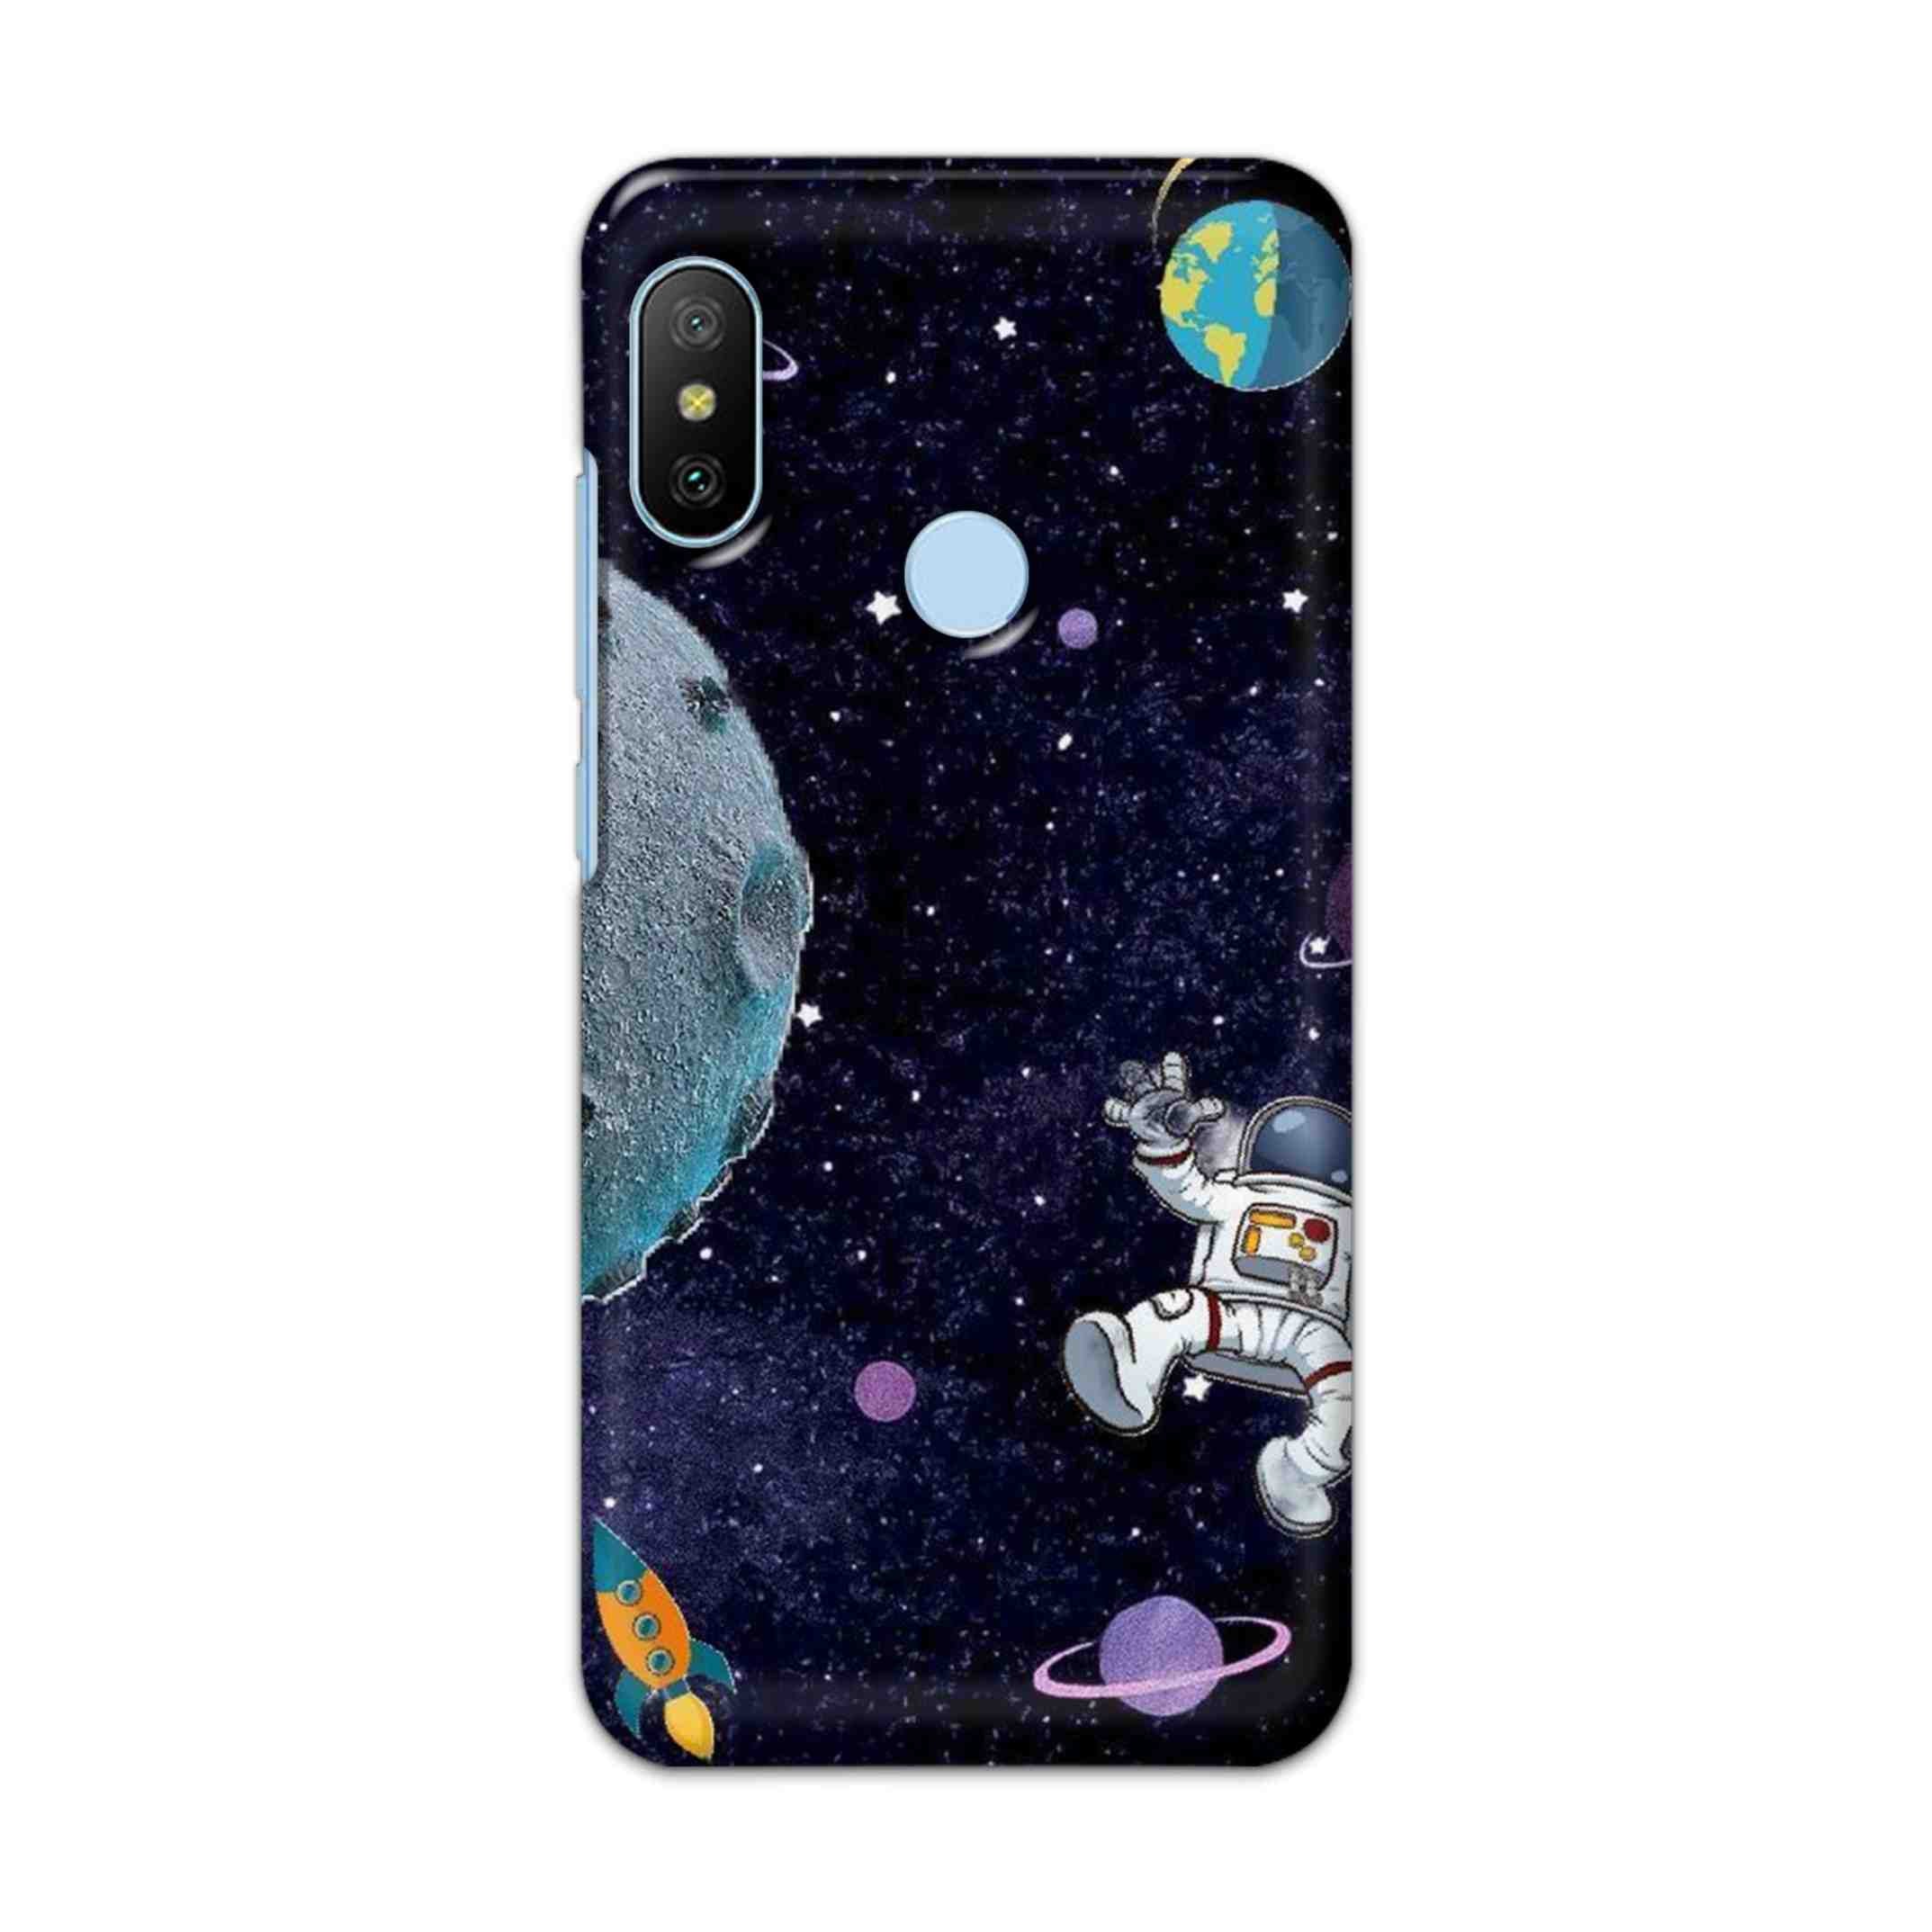 Buy Space Hard Back Mobile Phone Case/Cover For Xiaomi Redmi 6 Pro Online